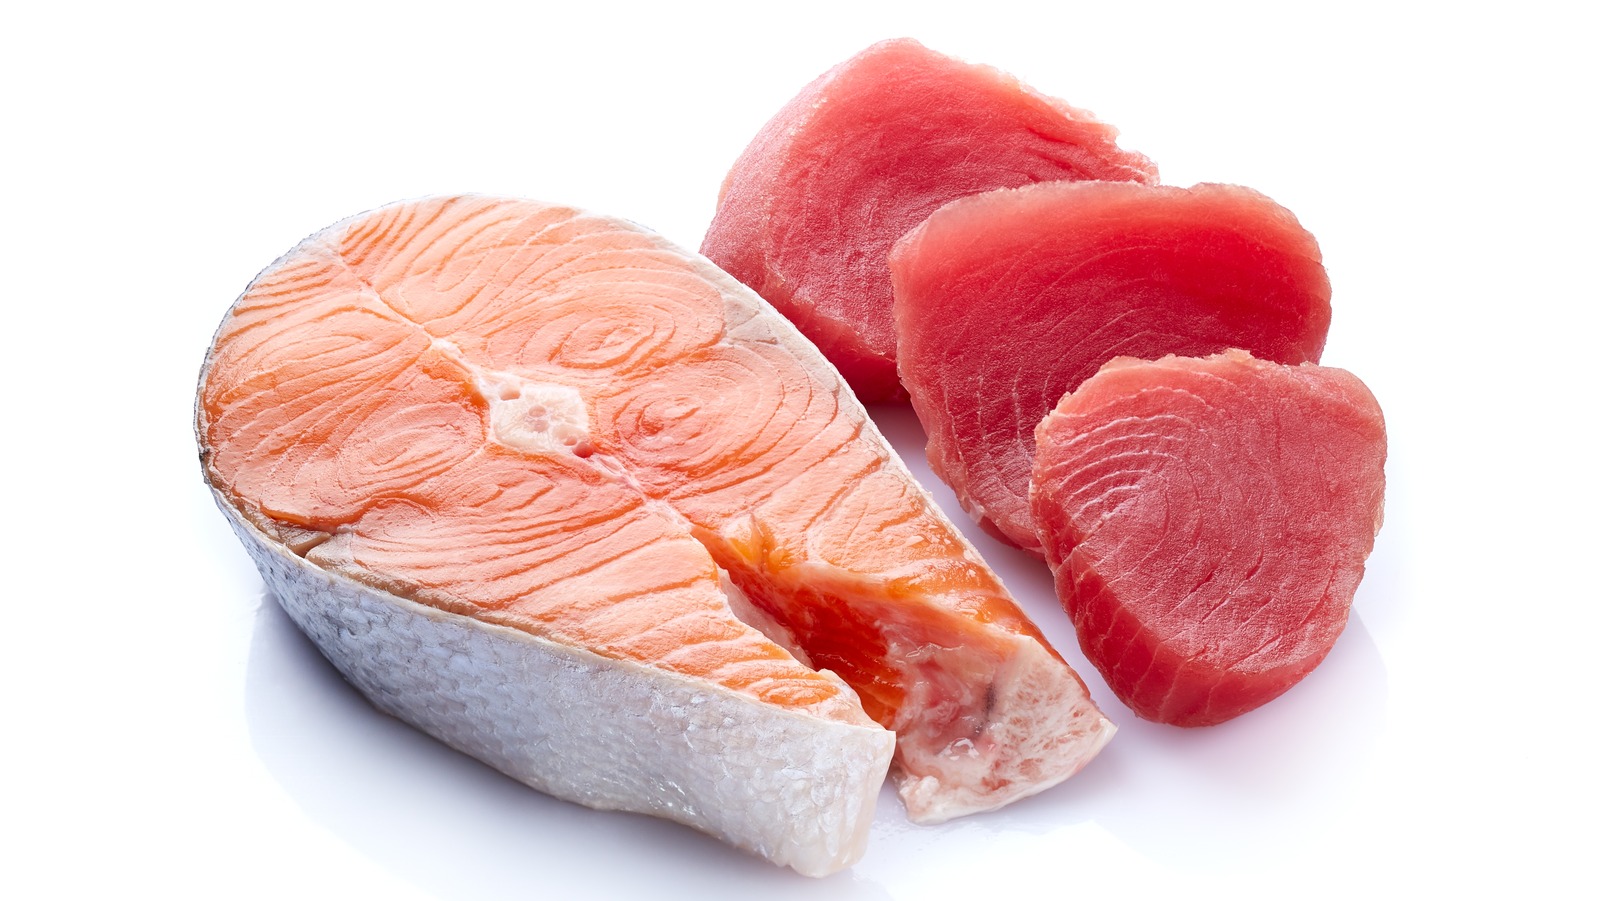 Salmonella Risk Prompts Company To Recall Over 300,000 Pounds Of Fish